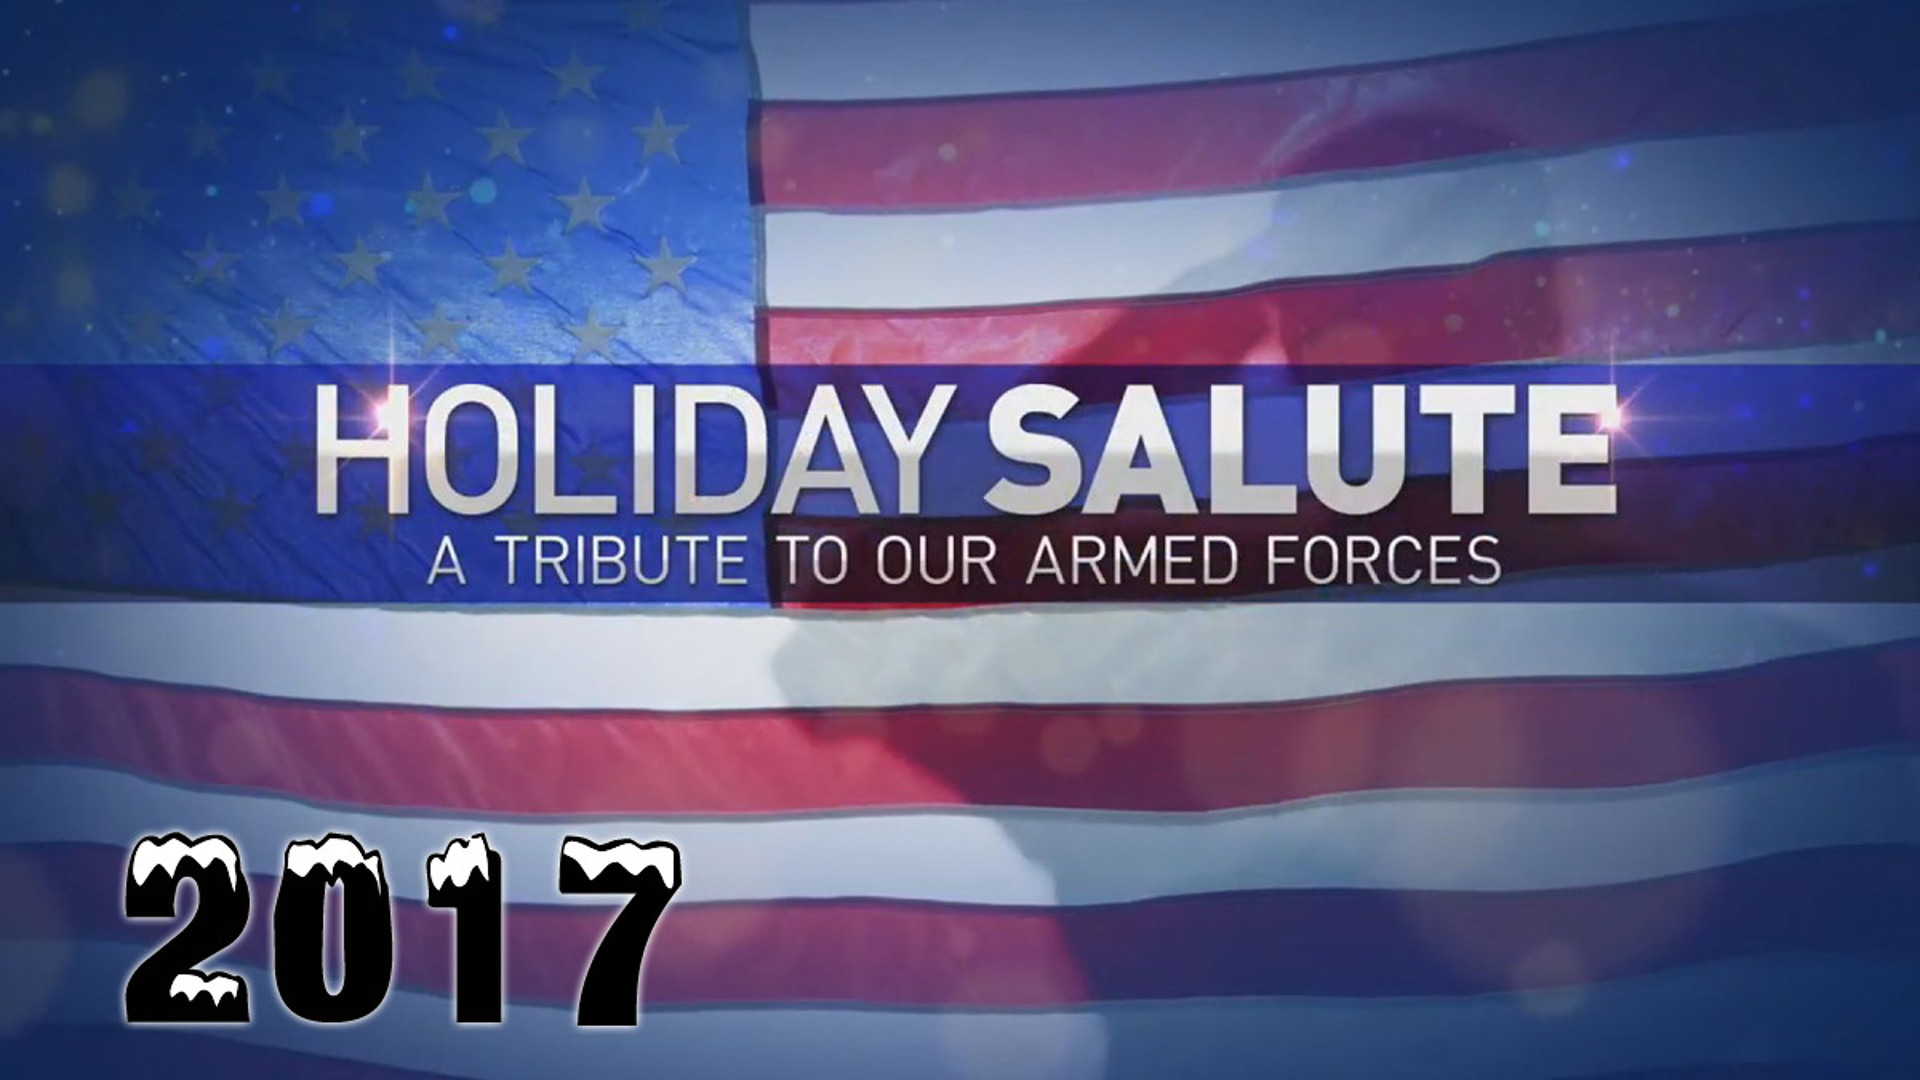 For more than 35 years, 13News Now has honored our military men & women with an annual holiday special. This is the 32nd annual Holiday Salute, which aired in 2017.